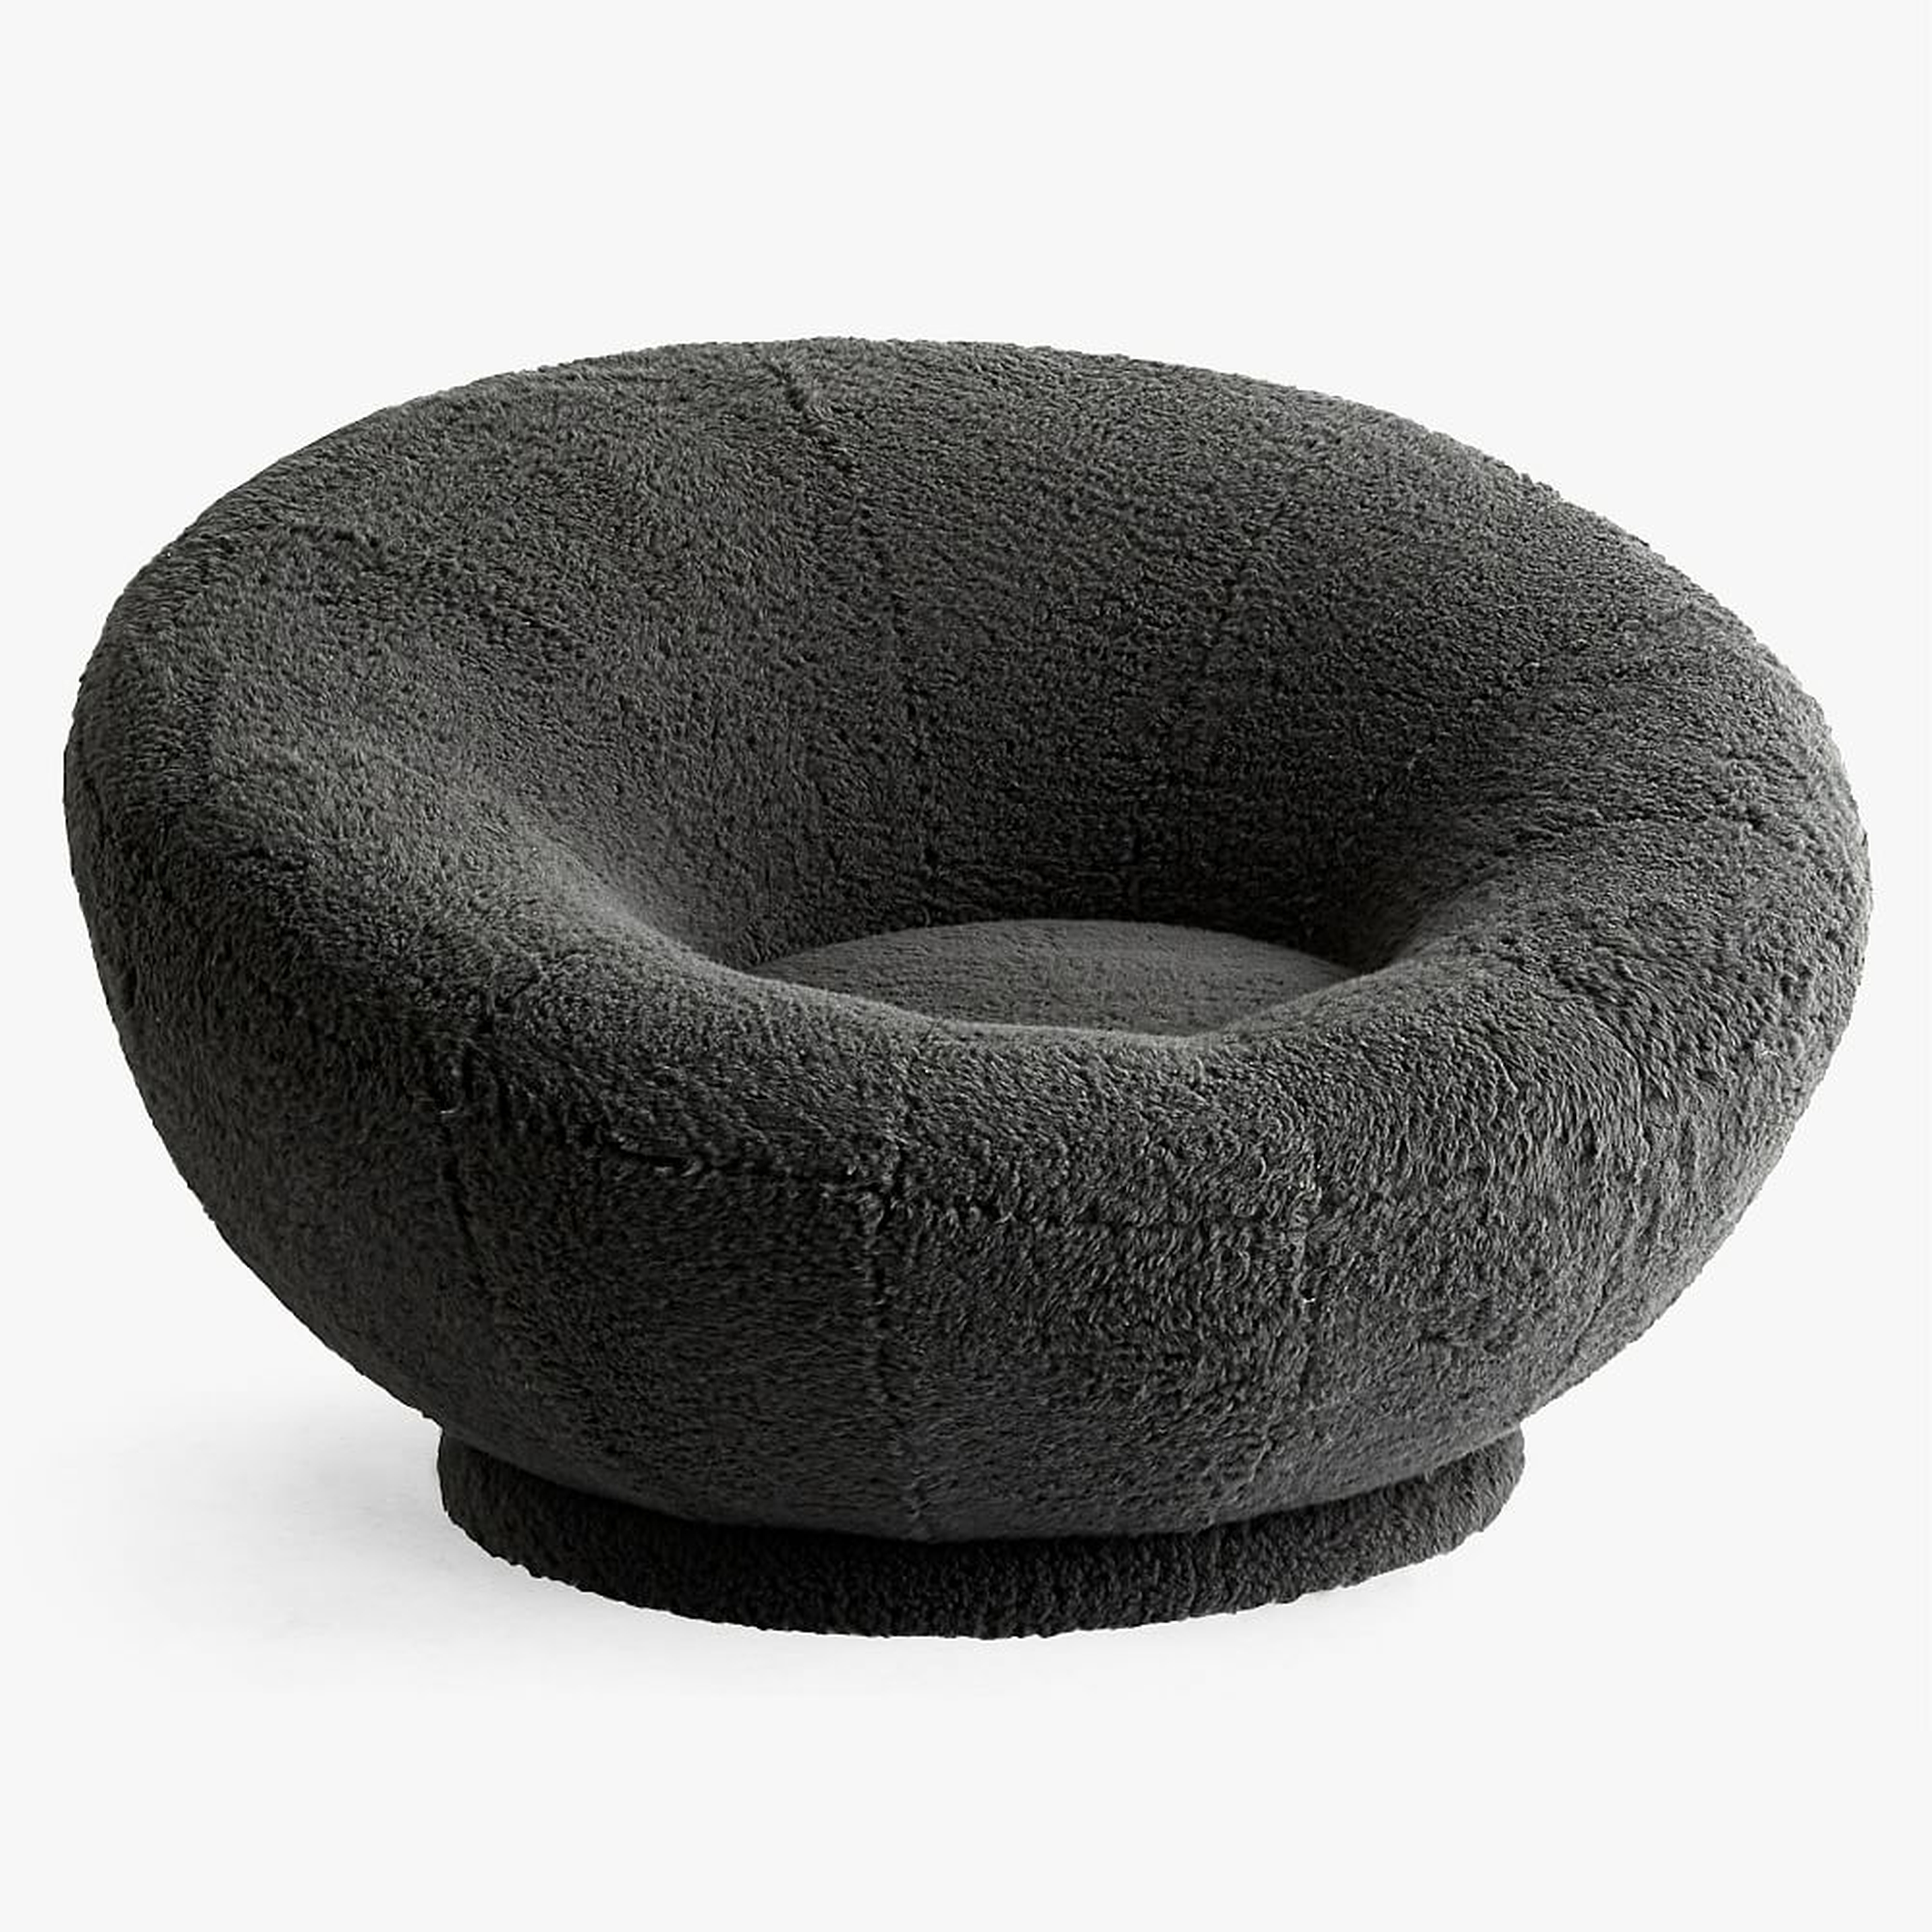 Sherpa Charcoal Groovy Swivel Chair, In Home Delivery - Pottery Barn Teen